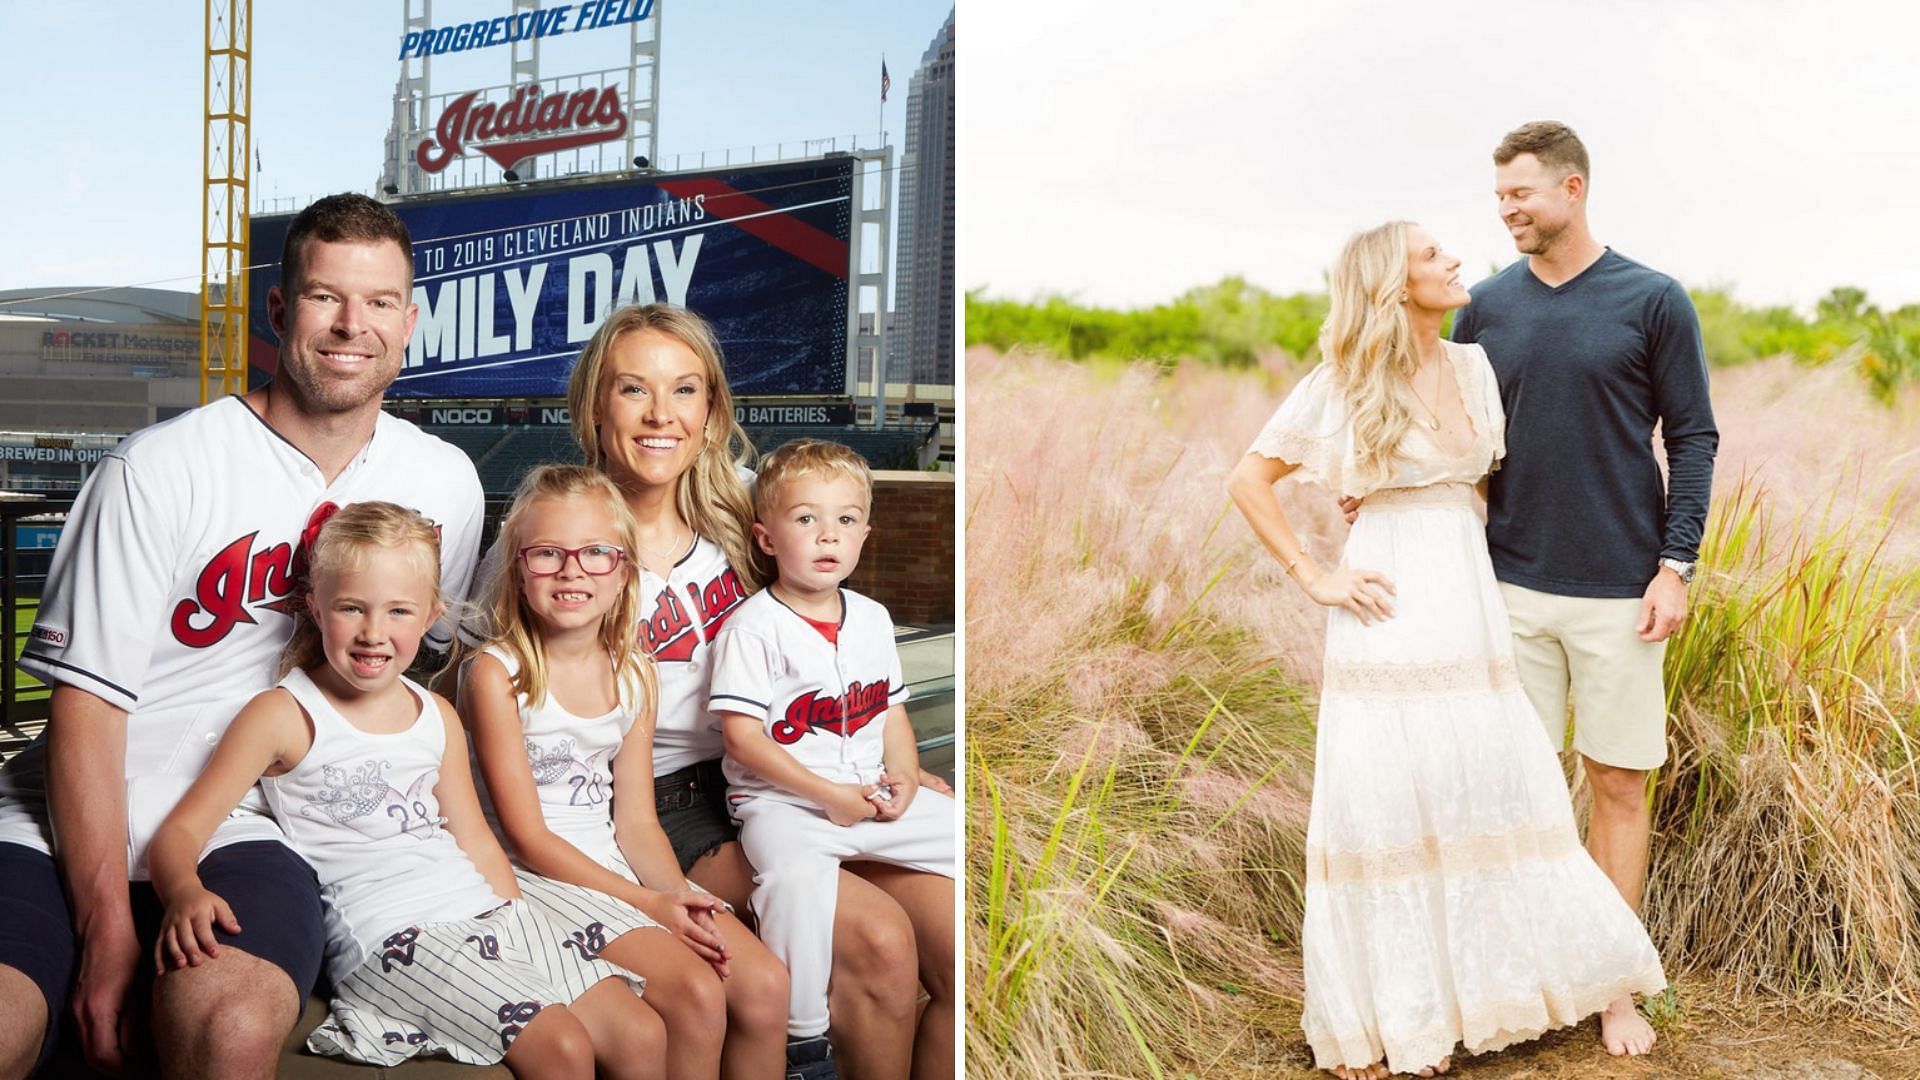 Who is Corey Kluber's wife, Amanda Kluber? A glimpse into the